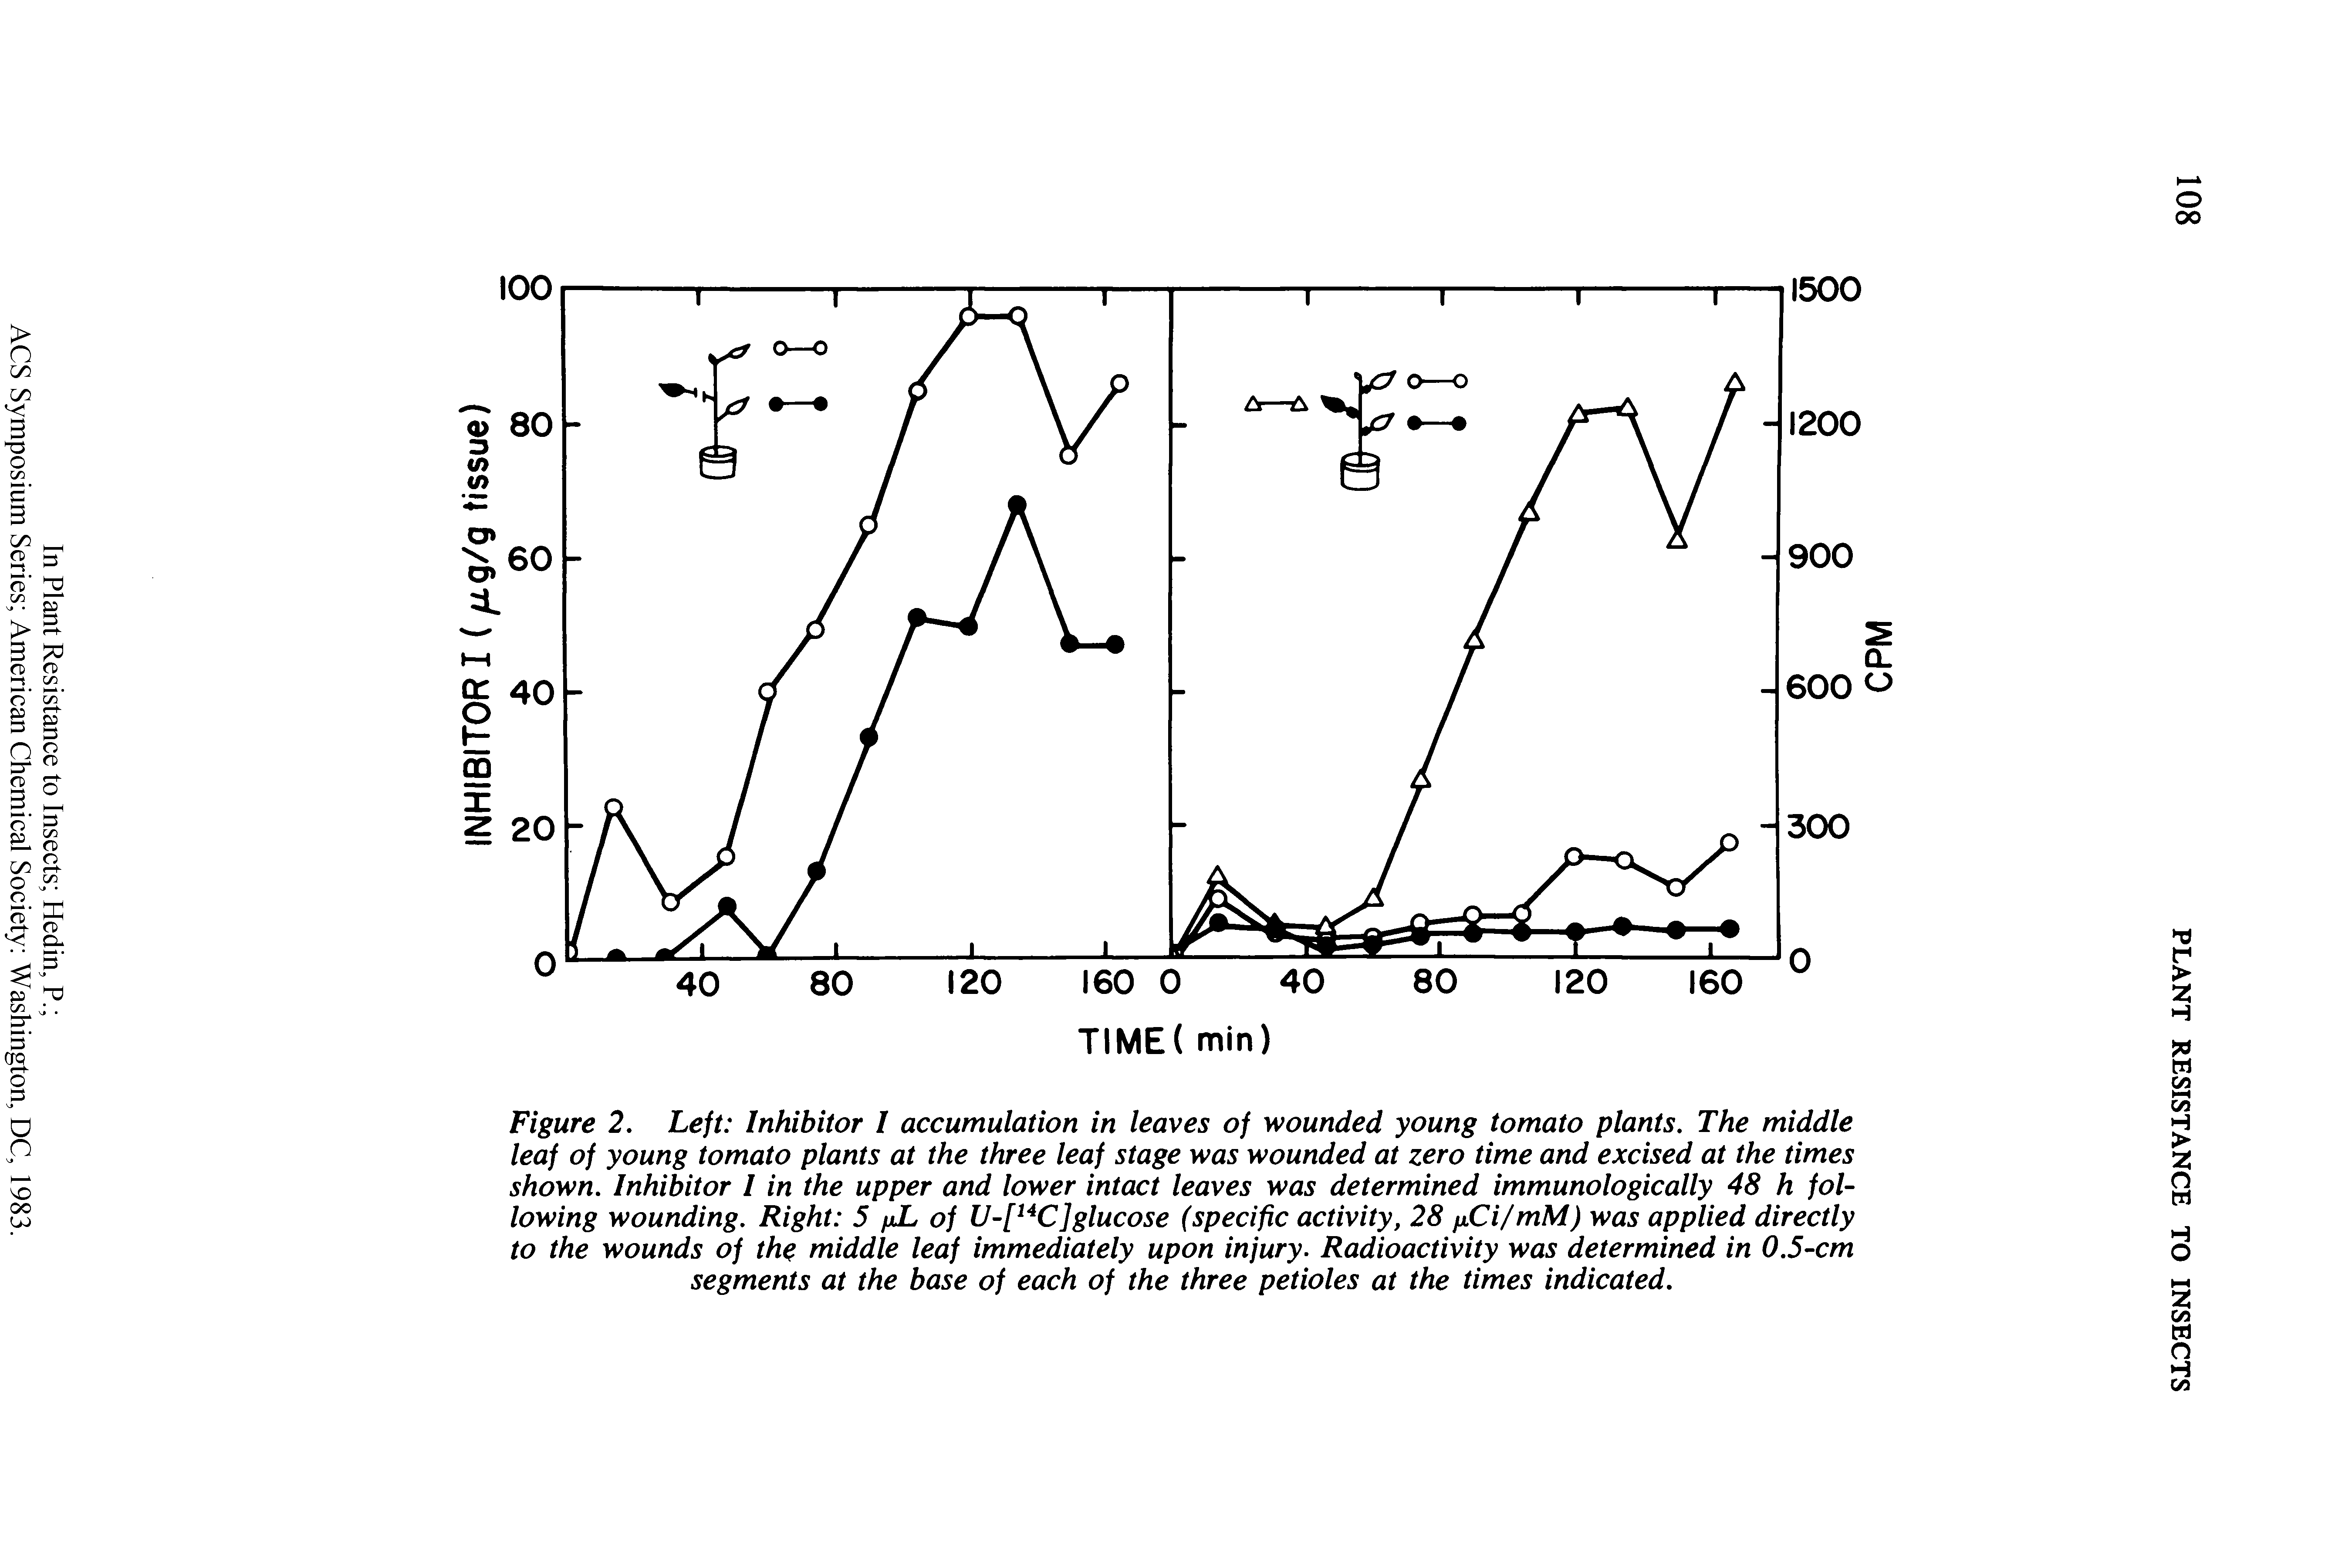 Figure 2. Left Inhibitor I accumulation in leaves of wounded young tomato plants. The middle leaf of young tomato plants at the three leaf stage was wounded at zero time and excised at the times shown. Inhibitor I in the upper and lower intact leaves was determined immunologically 48 h following wounding. Right 5 /xL of glucose (specific activity, 28 Ci/mM) was applied directly...